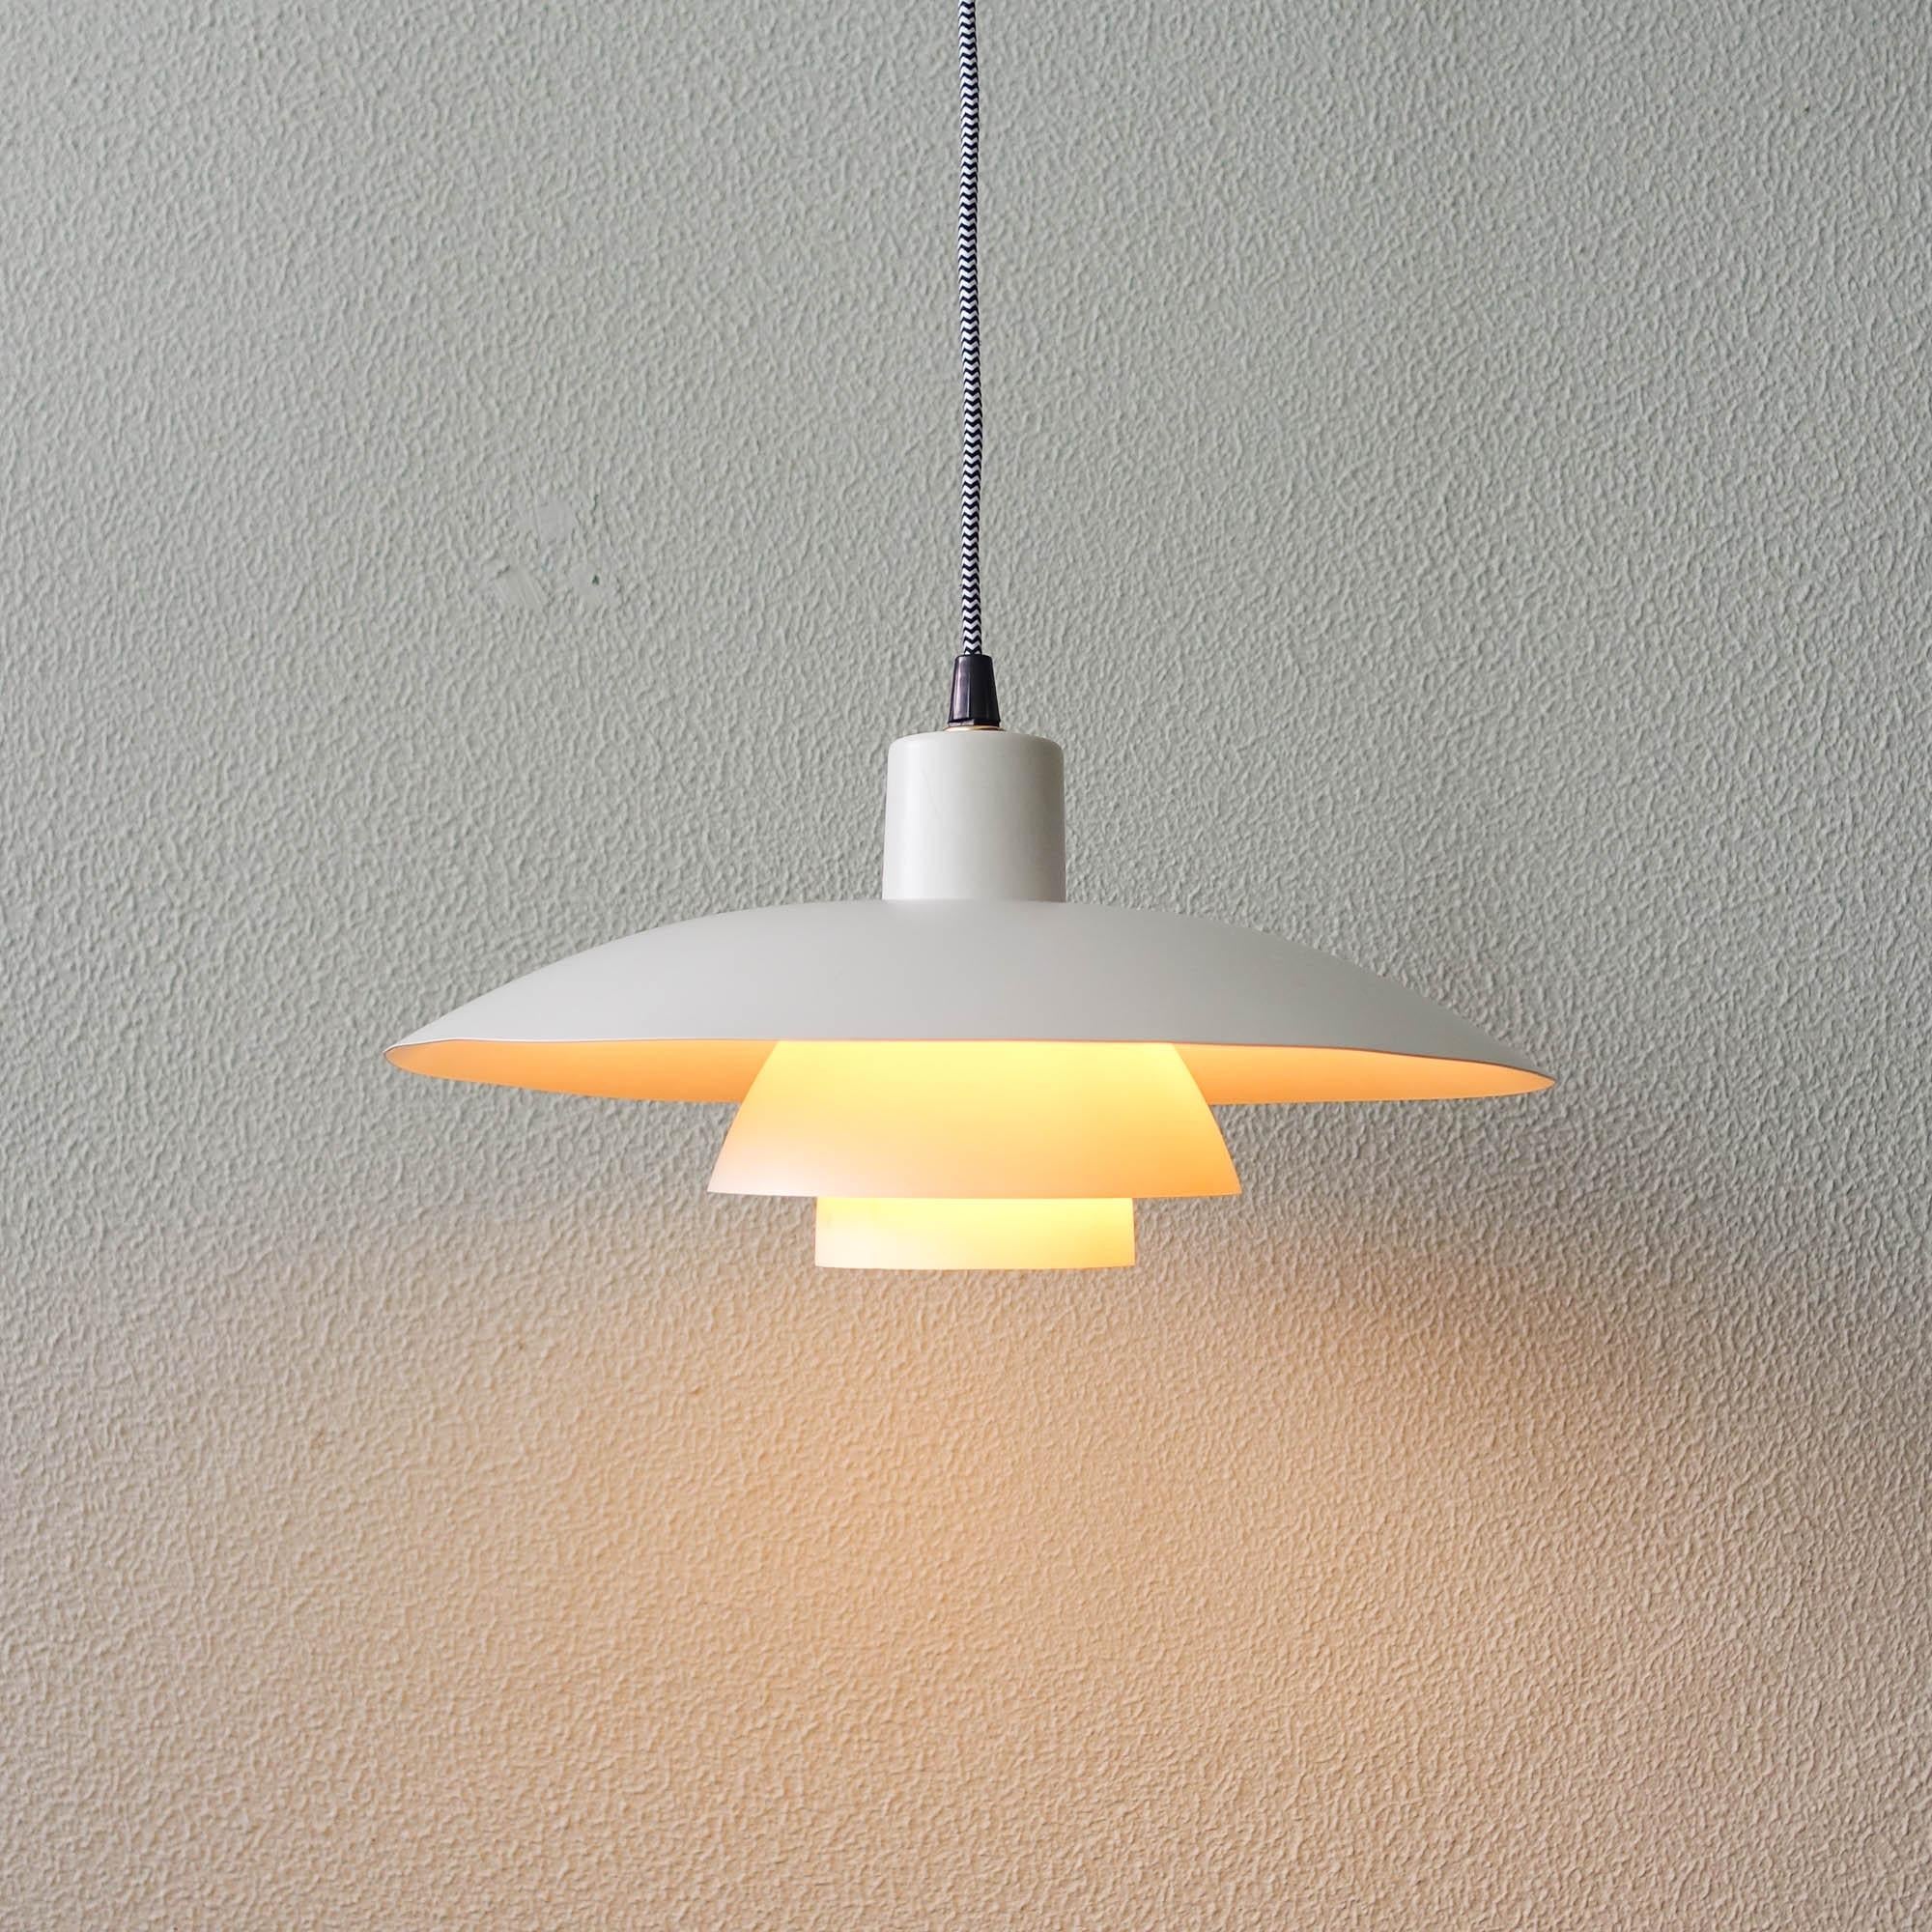 This pendant was designed by Poul Henningsen and produced by Louis Poulsen, in Denmark during the 1960s. It is made of powder-coated aluminum and is lit both downwards and from the sides. The PH 4/3 model is based on the principle of a reflecting